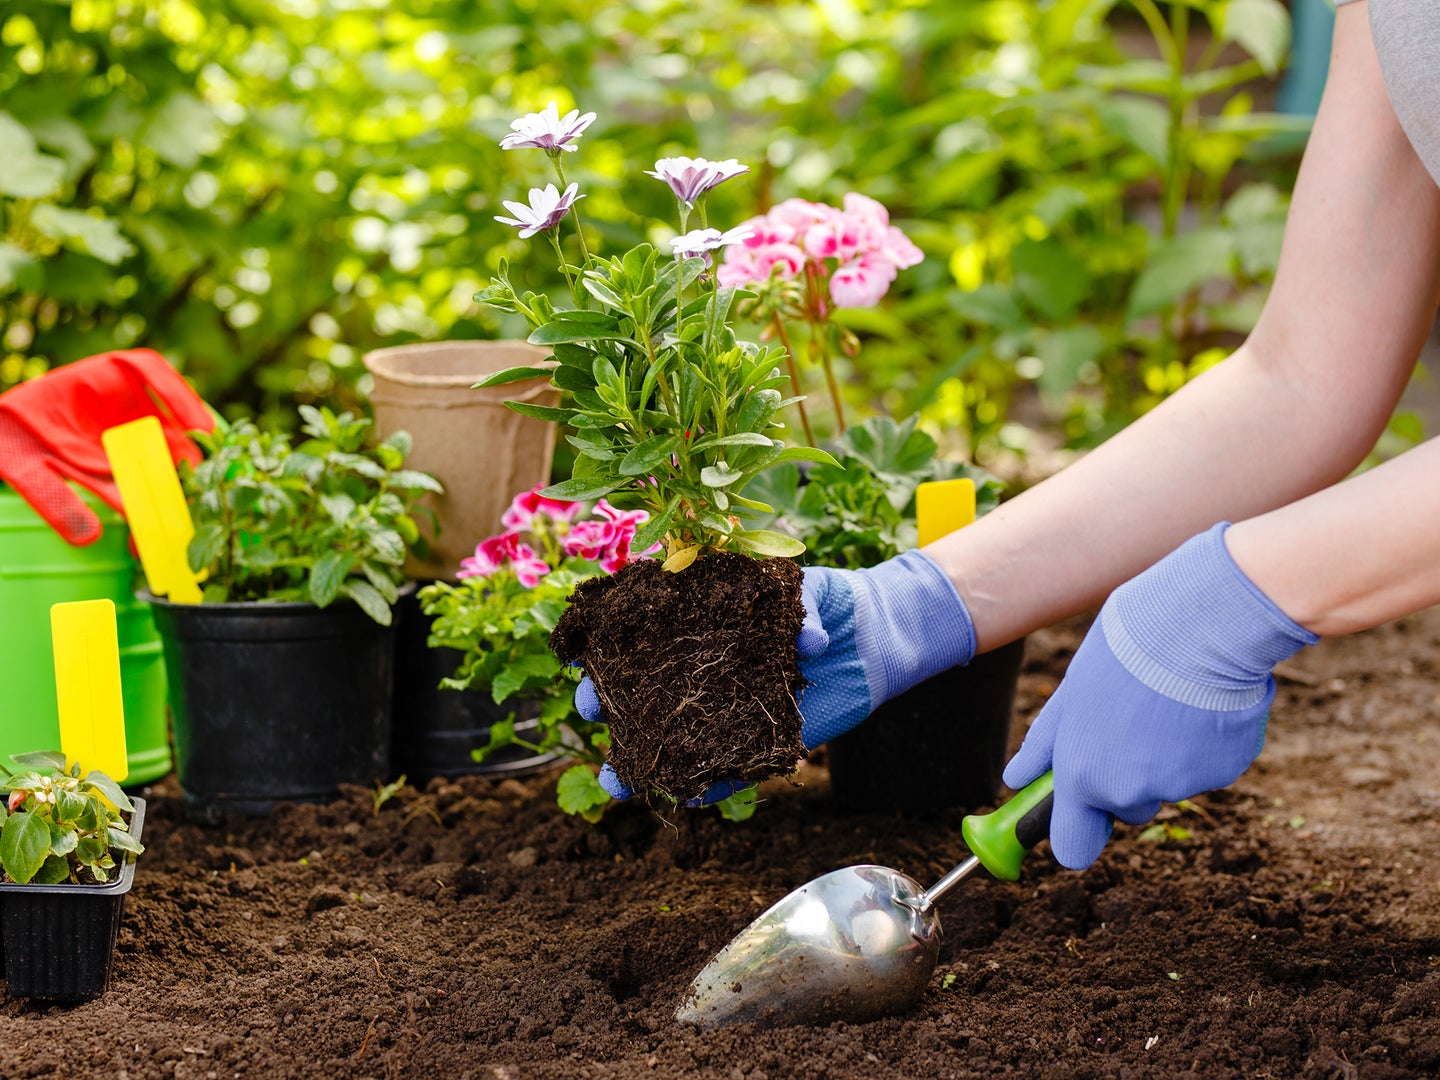 A photo of a person's hands and arms who is gardening with flowers.